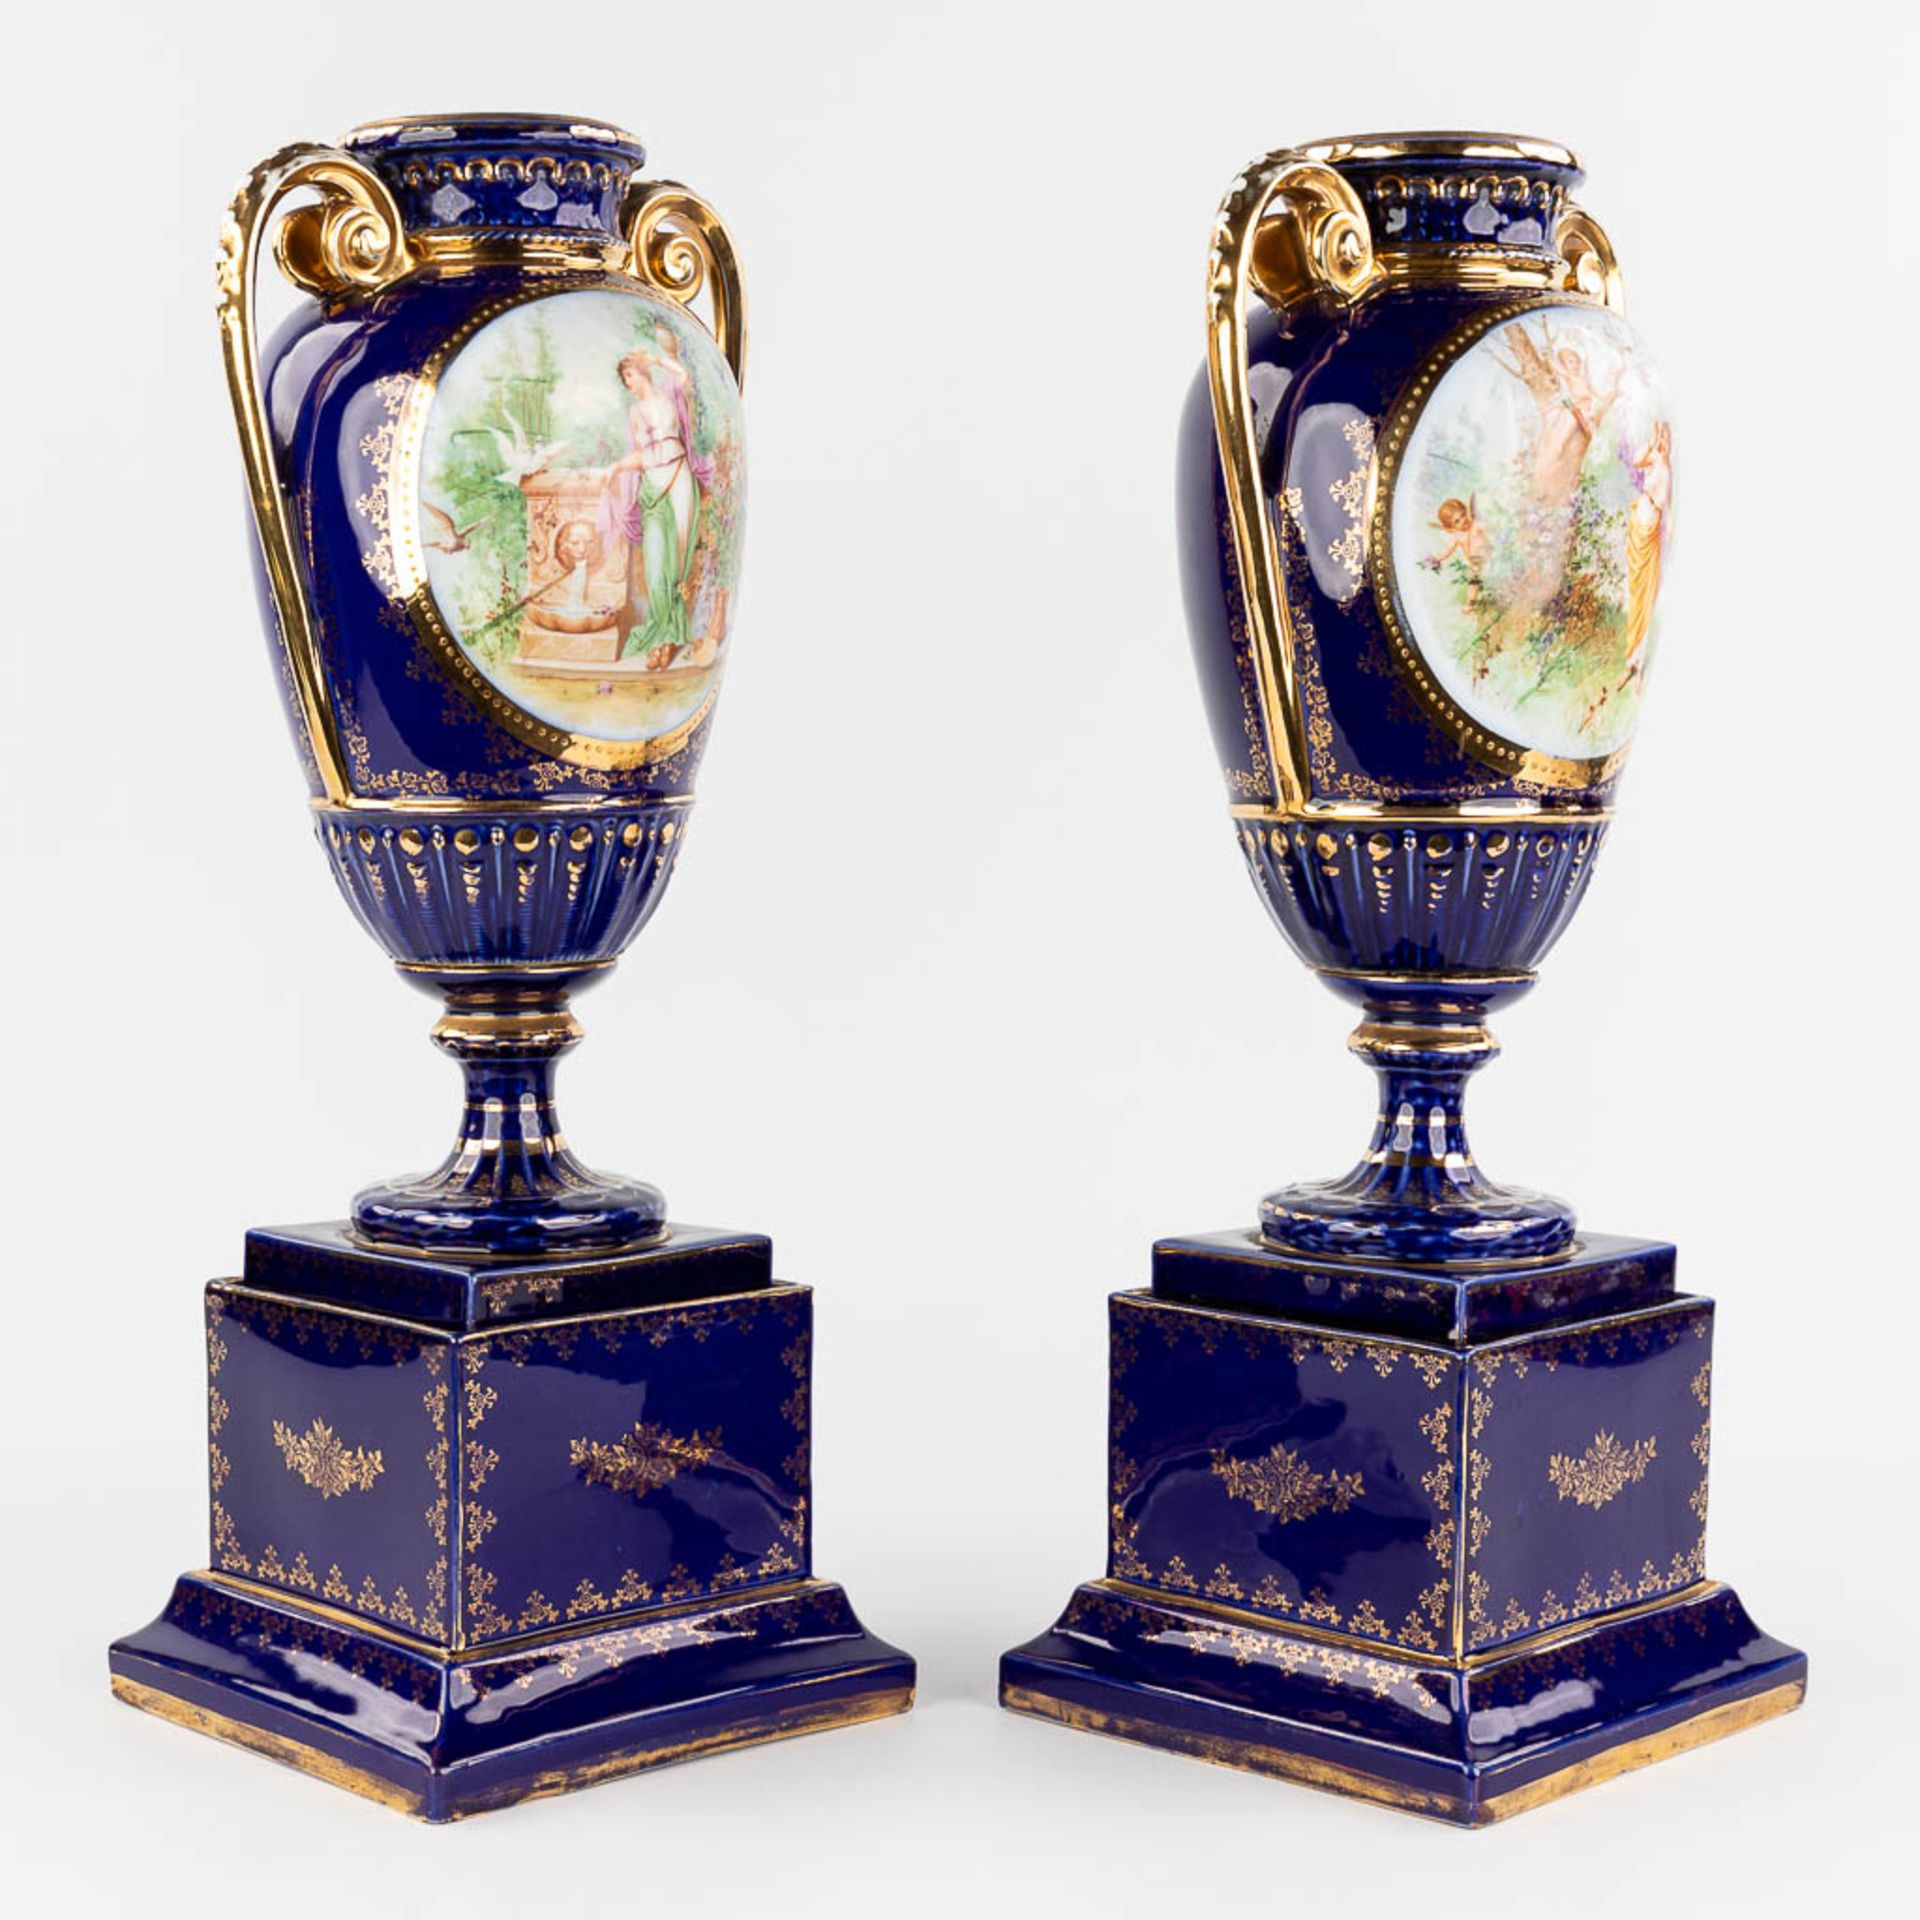 A pair of vases, with a transferprint decor. 20th C. (L: 18 x W: 18 x H: 50 cm) - Image 3 of 12